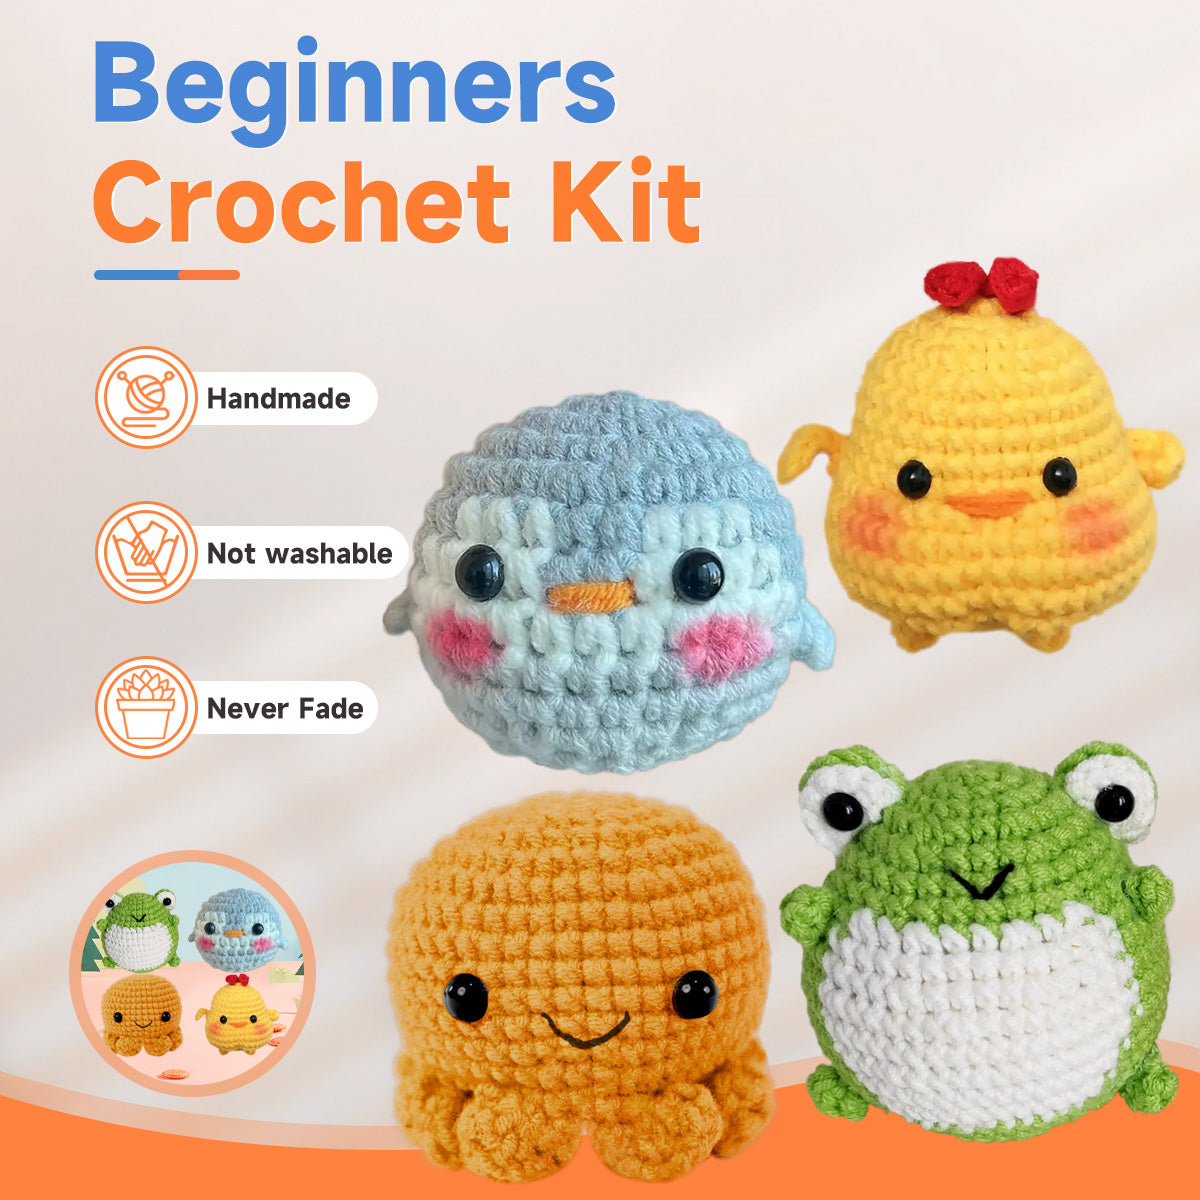 1PCS DIY Penguin Animal Crochet Kit with Step-by-Step Video Tutorials –  yamaxin